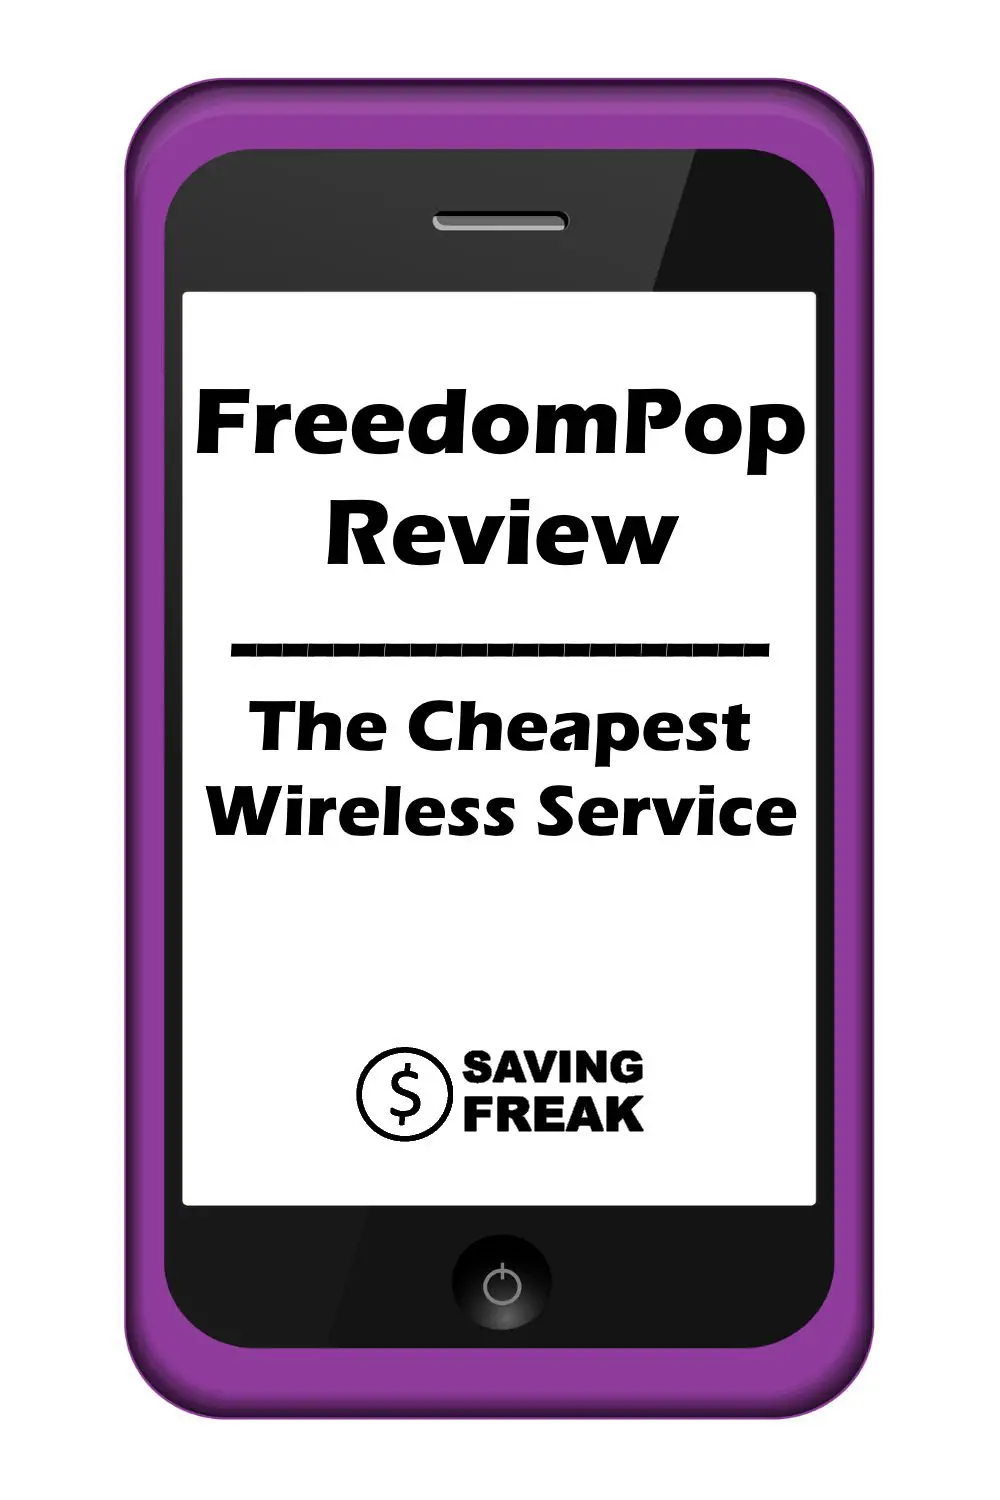 A full FreedomPop review covering all the features and free wireless internet.